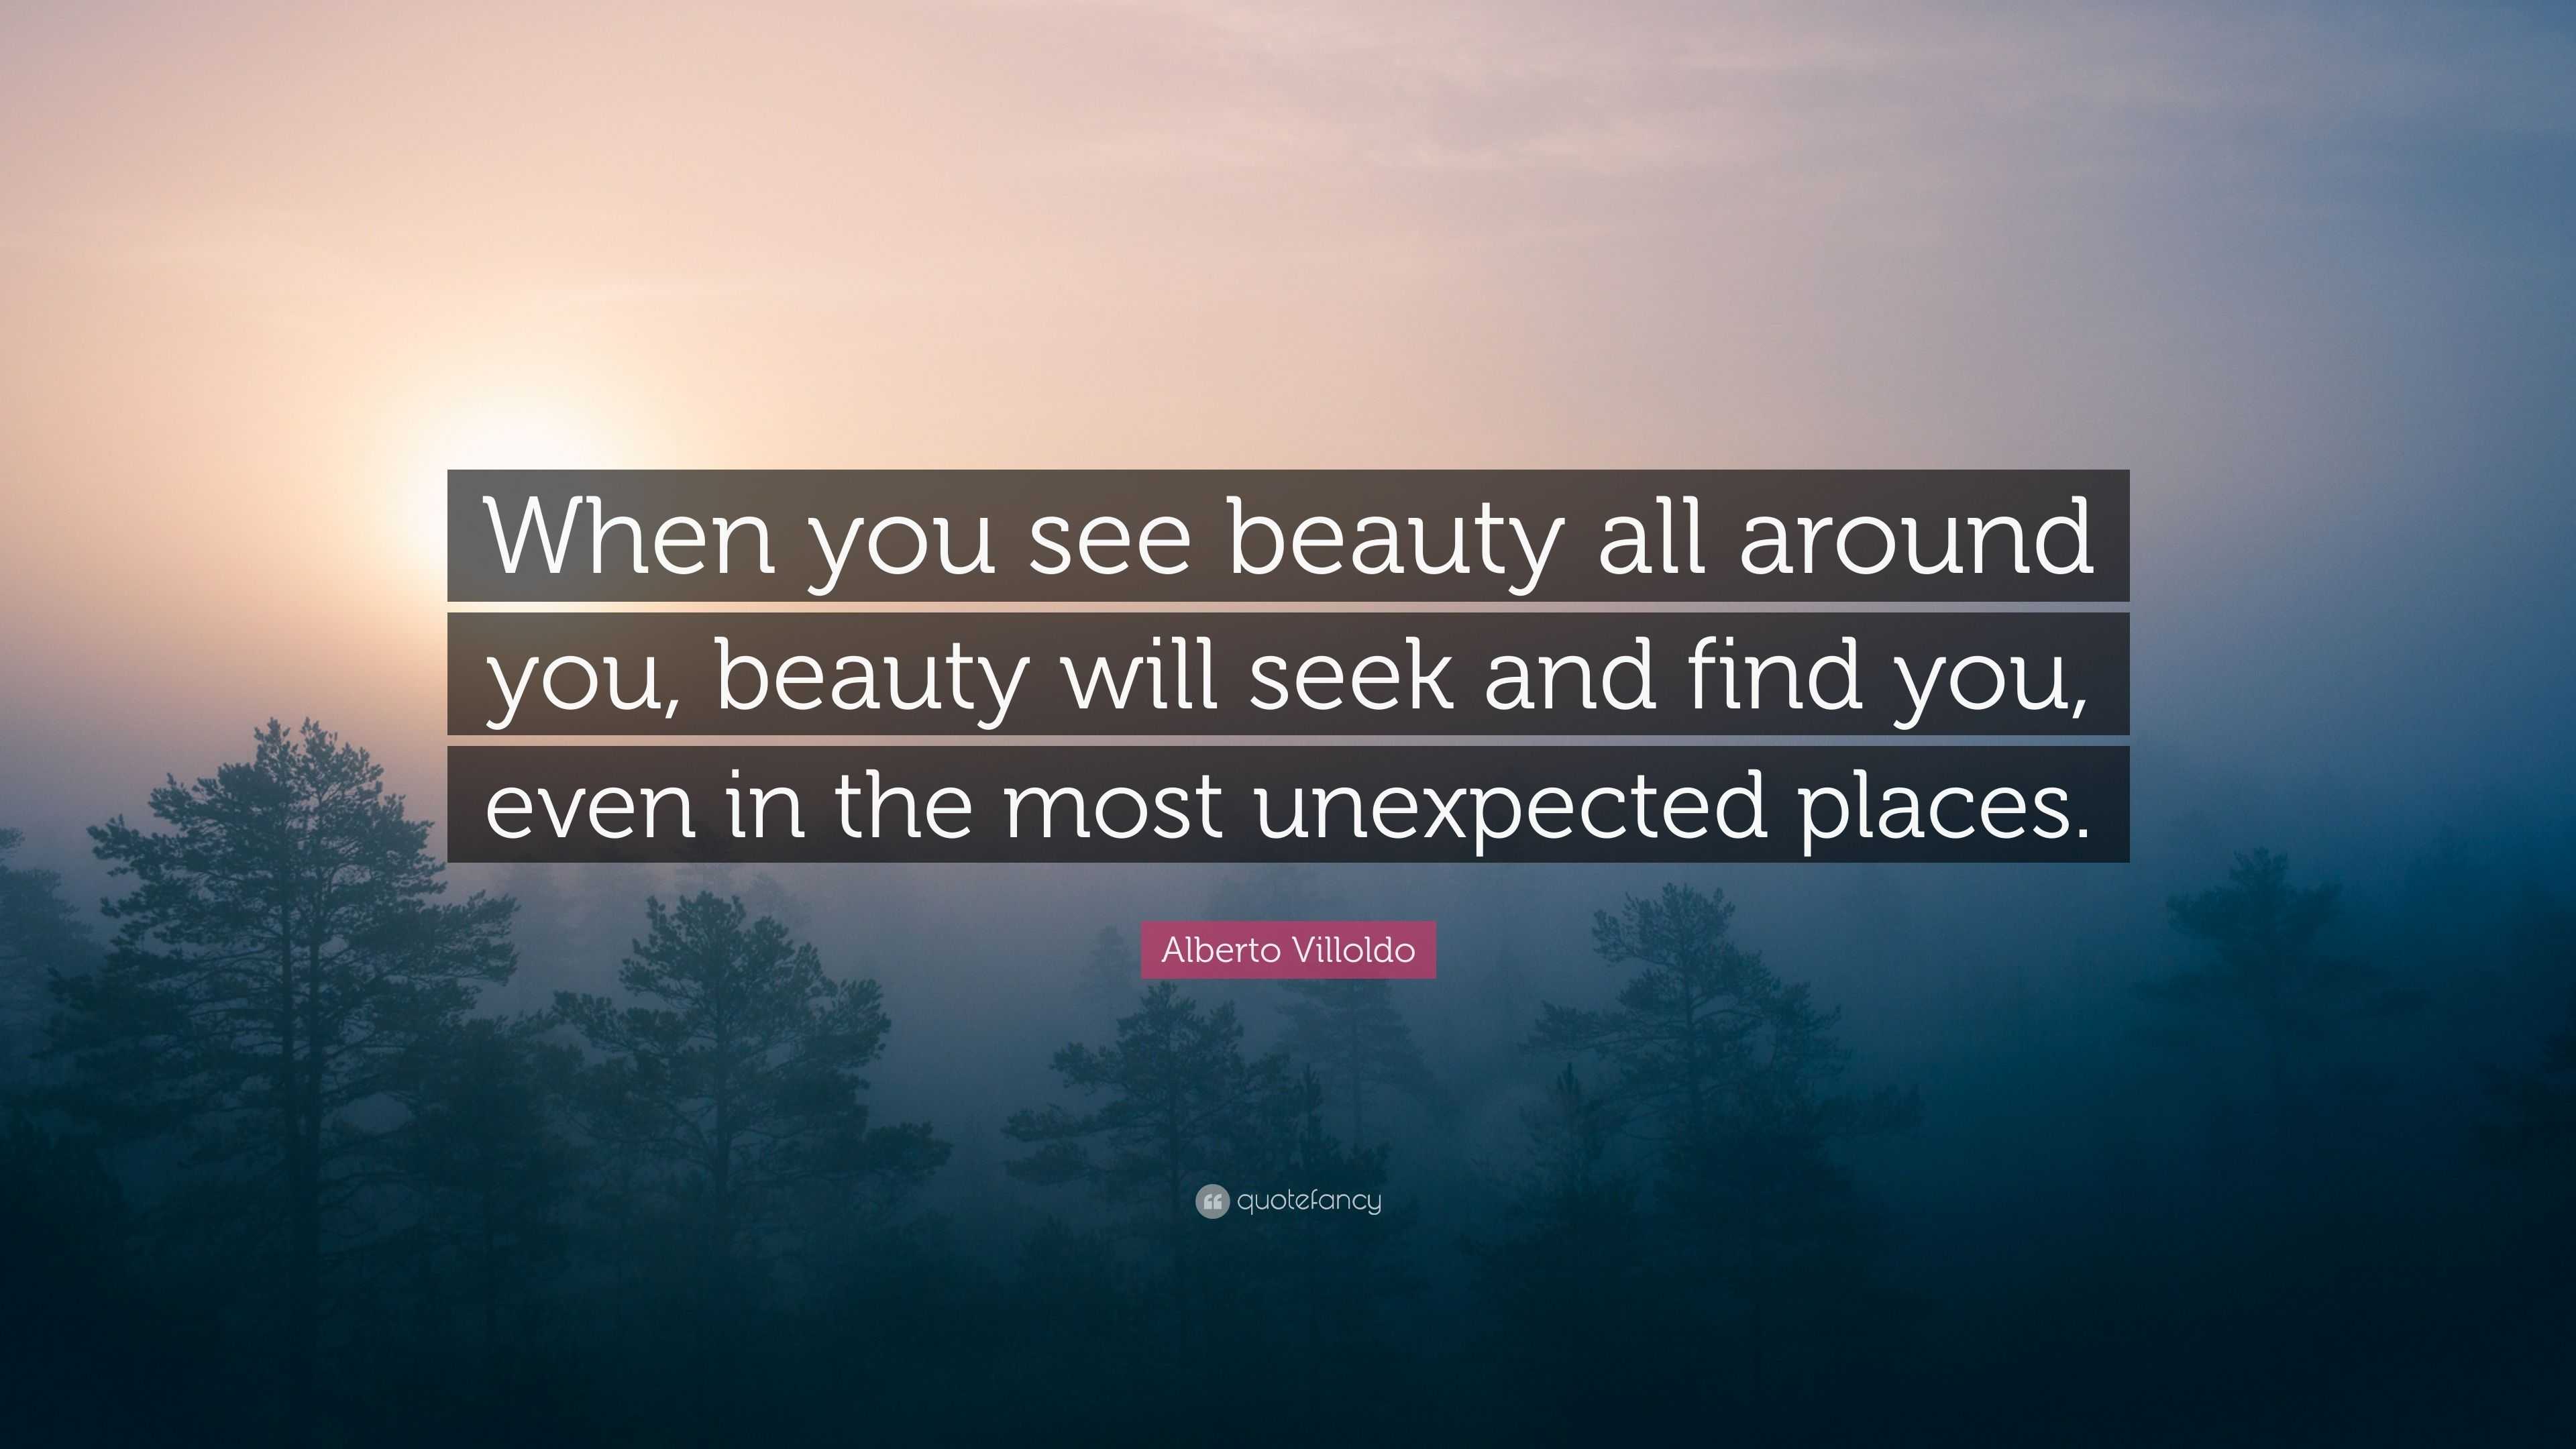 Alberto Villoldo Quote: “When you see beauty all around you, beauty ...